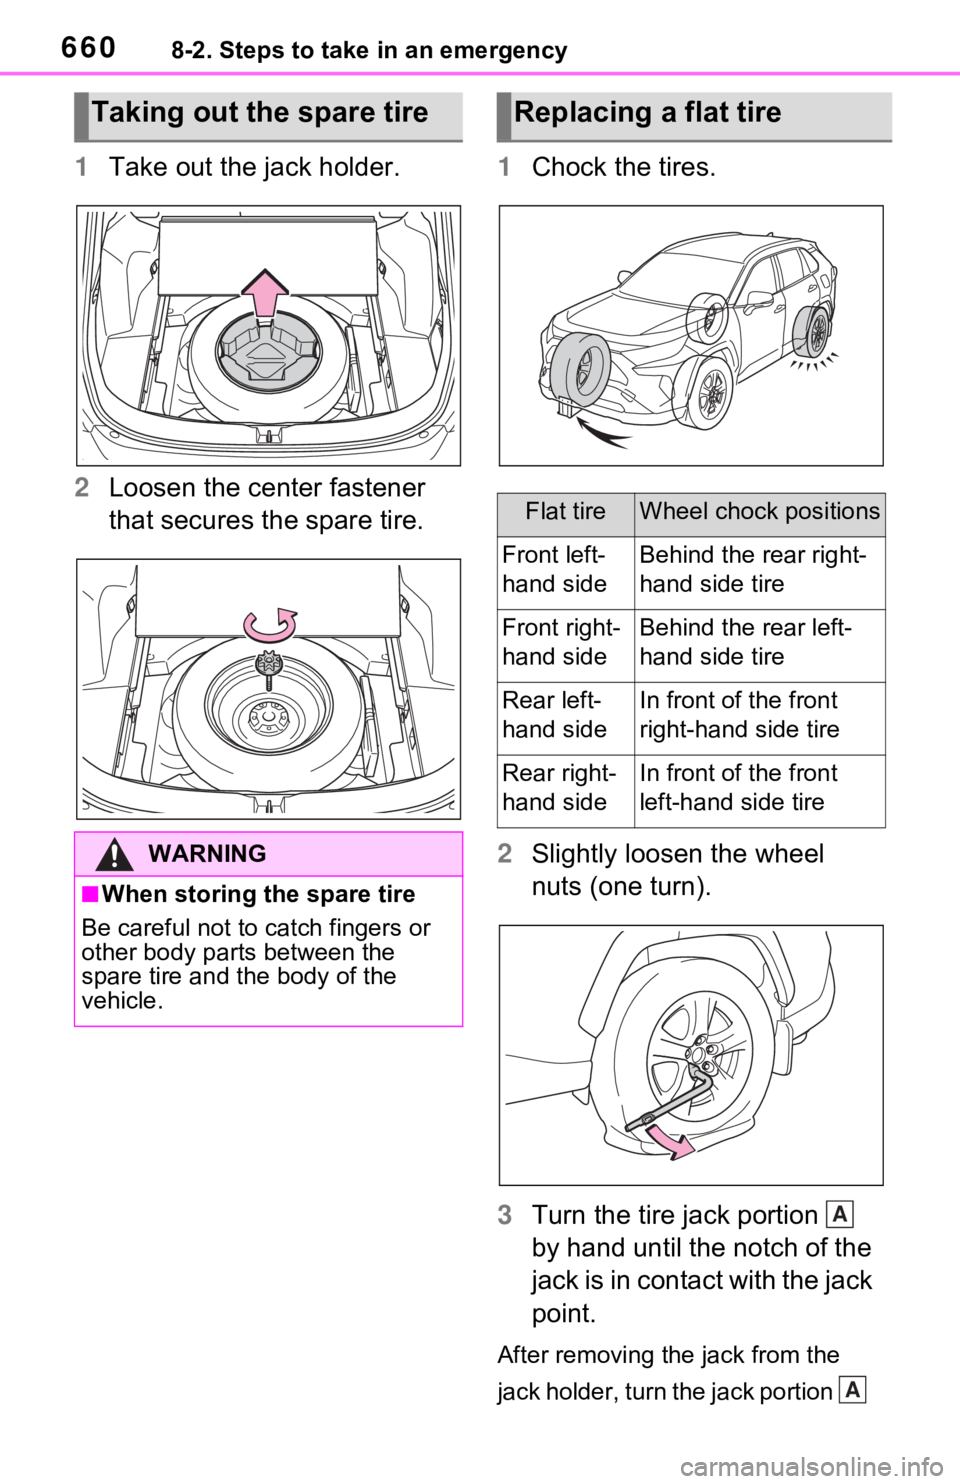 TOYOTA RAV4 HYBRID 2021 Service Manual 6608-2. Steps to take in an emergency
1Take out the jack holder.
2 Loosen the center fastener 
that secures the spare tire. 1
Chock the tires.
2 Slightly loosen the wheel 
nuts (one turn).
3 Turn the 